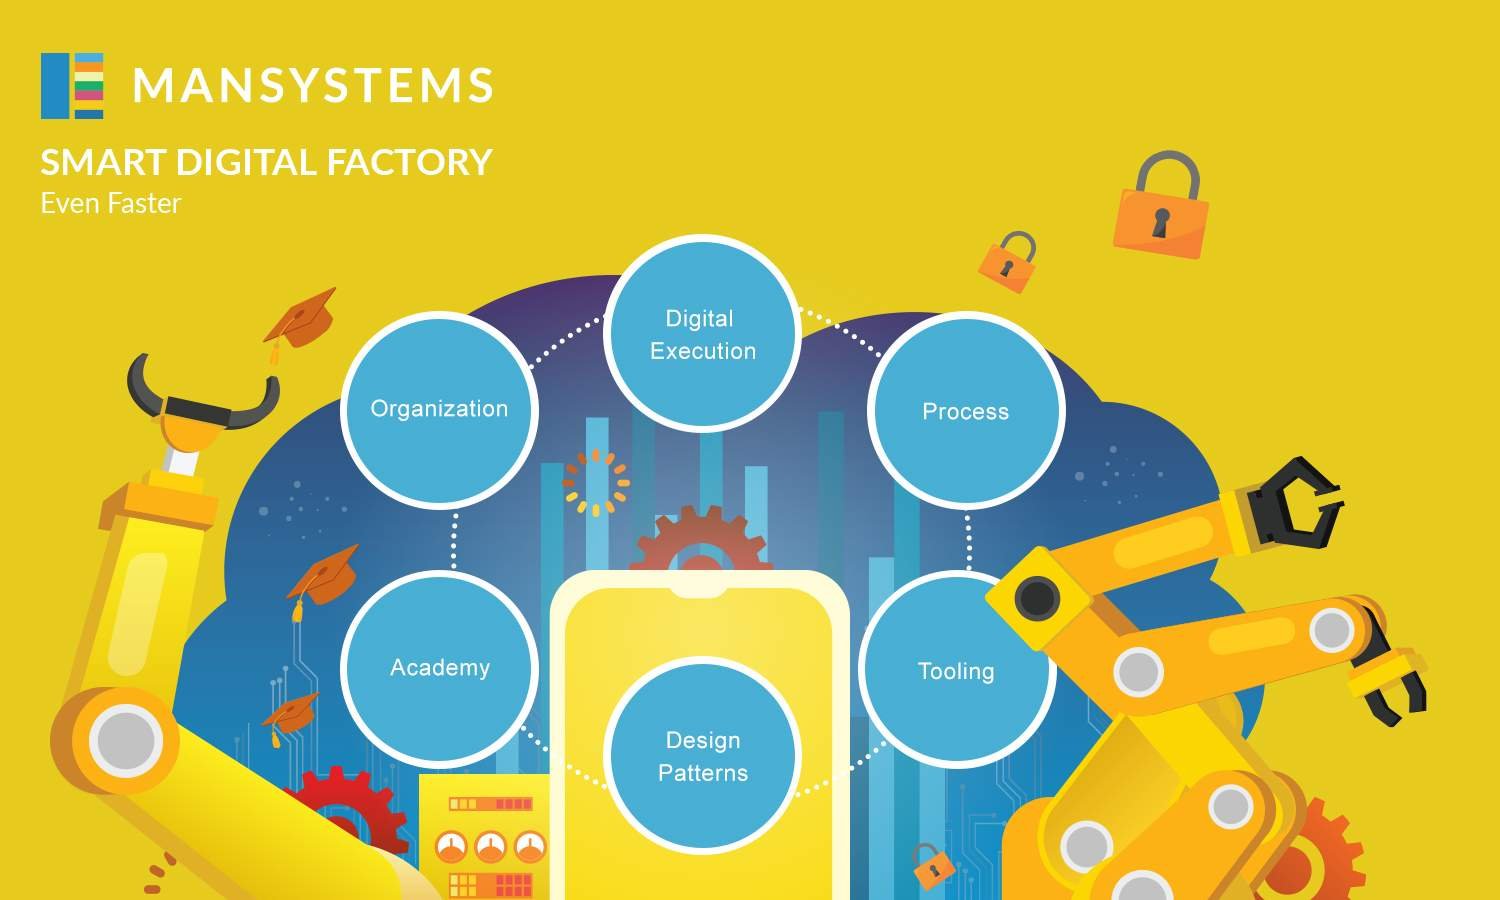 SMART_Digital_Factory_Even_Faster_graphic_Mansystems